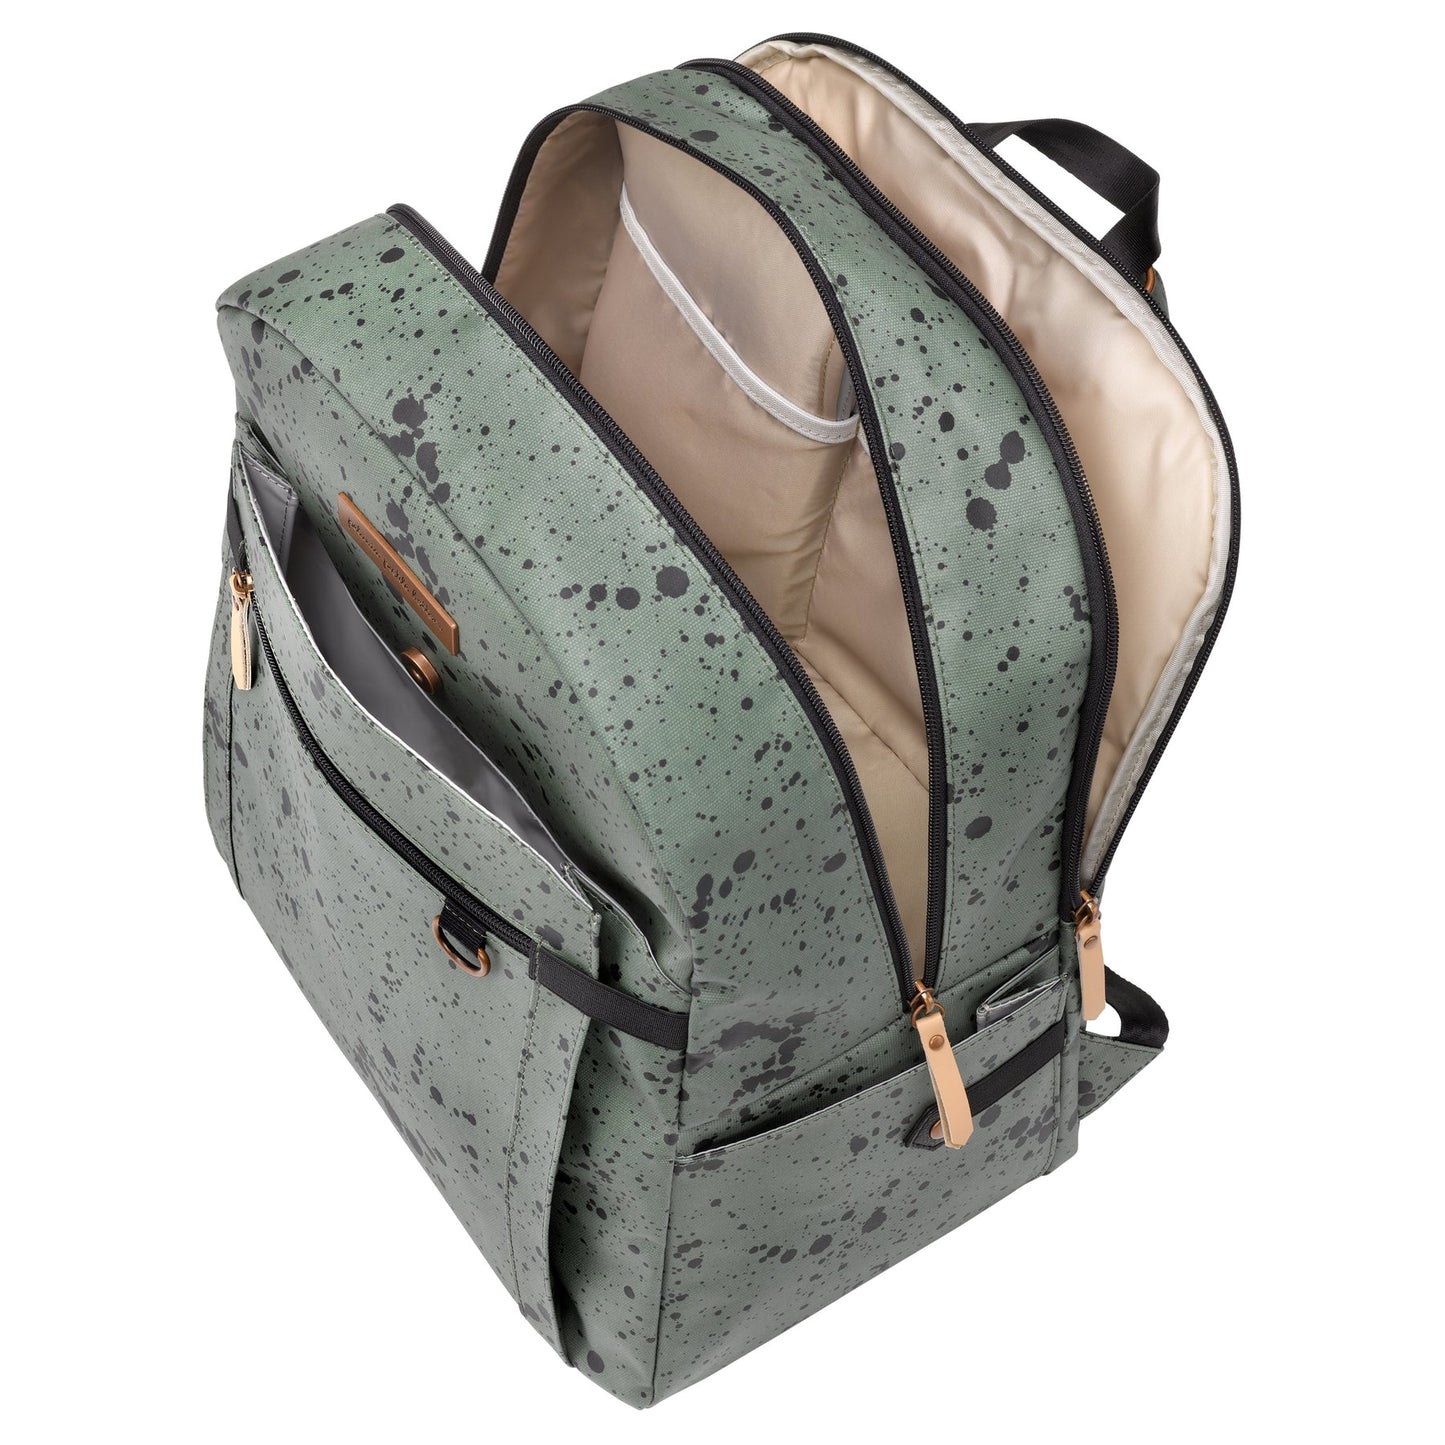 Petunia Pickle Bottom 2-in-1 provisions backpack